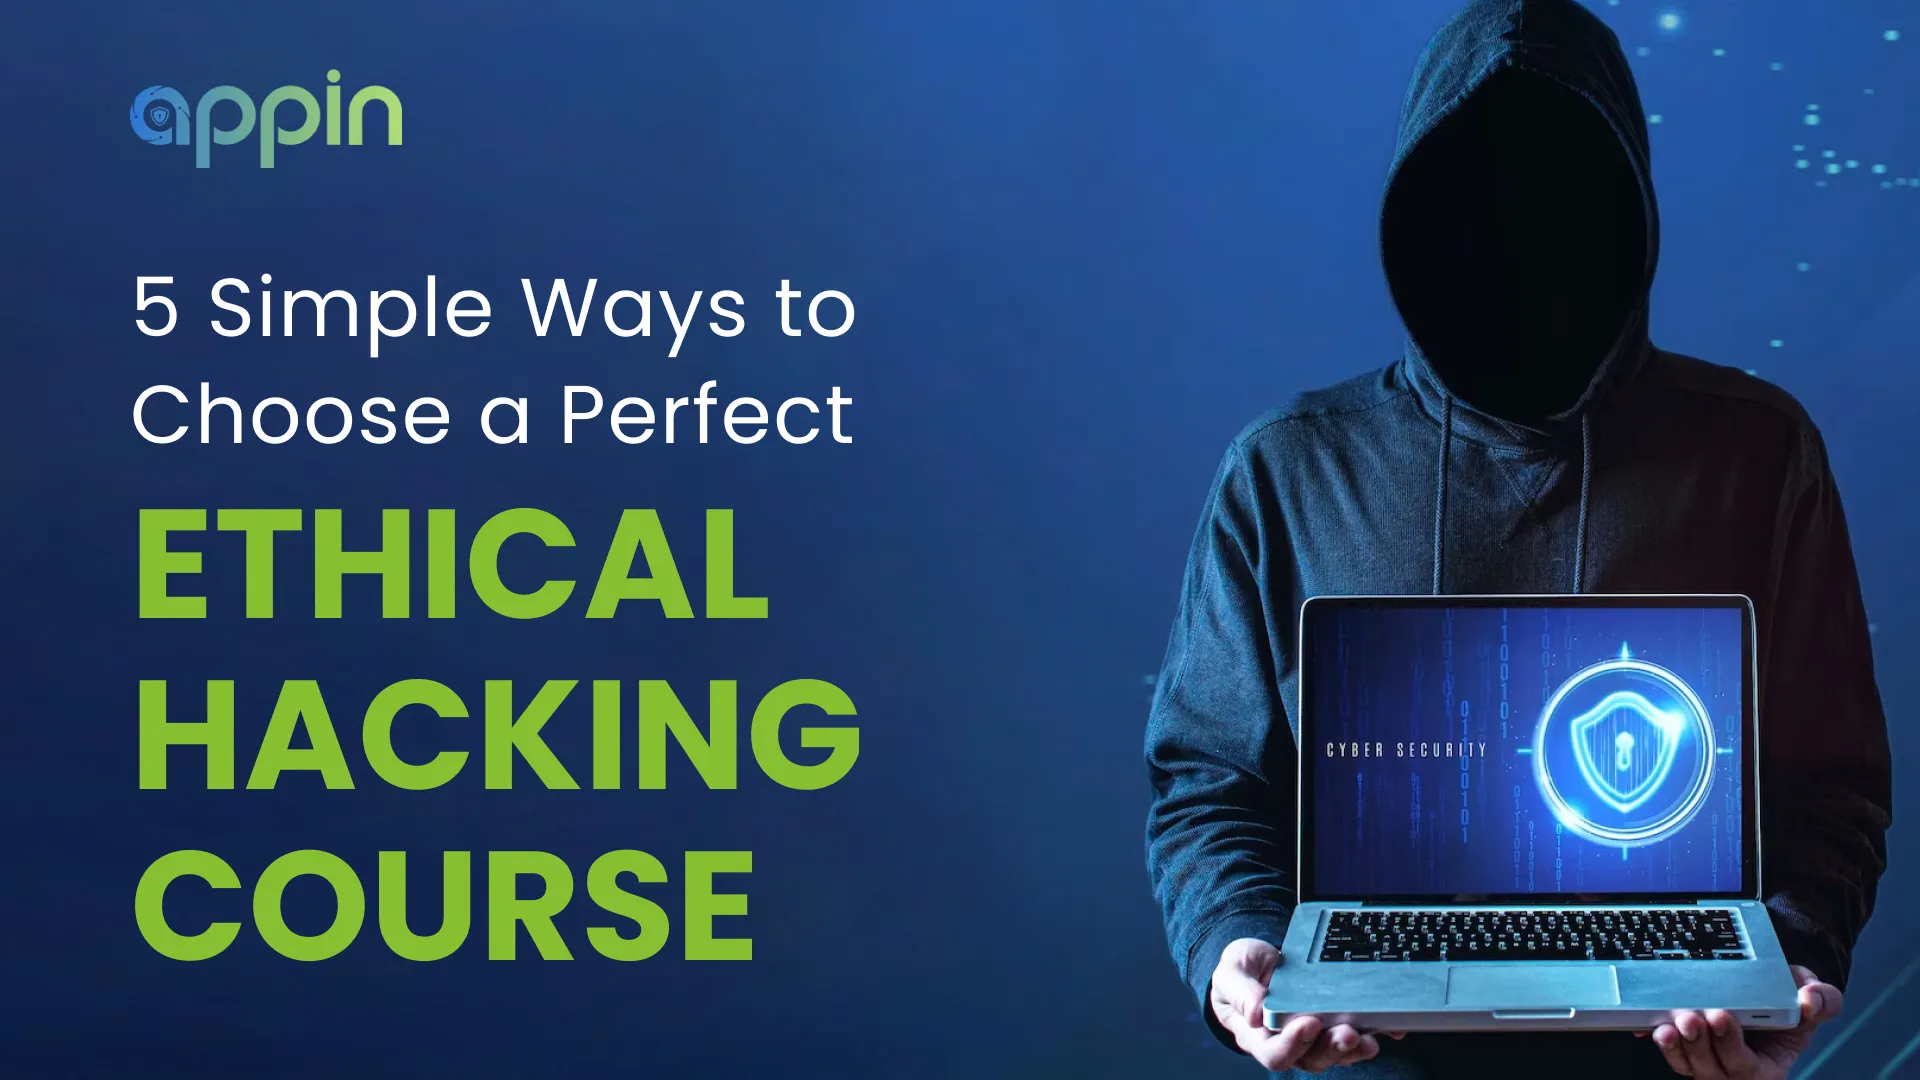 5 simple ways to choose a perfect ethical hacking course